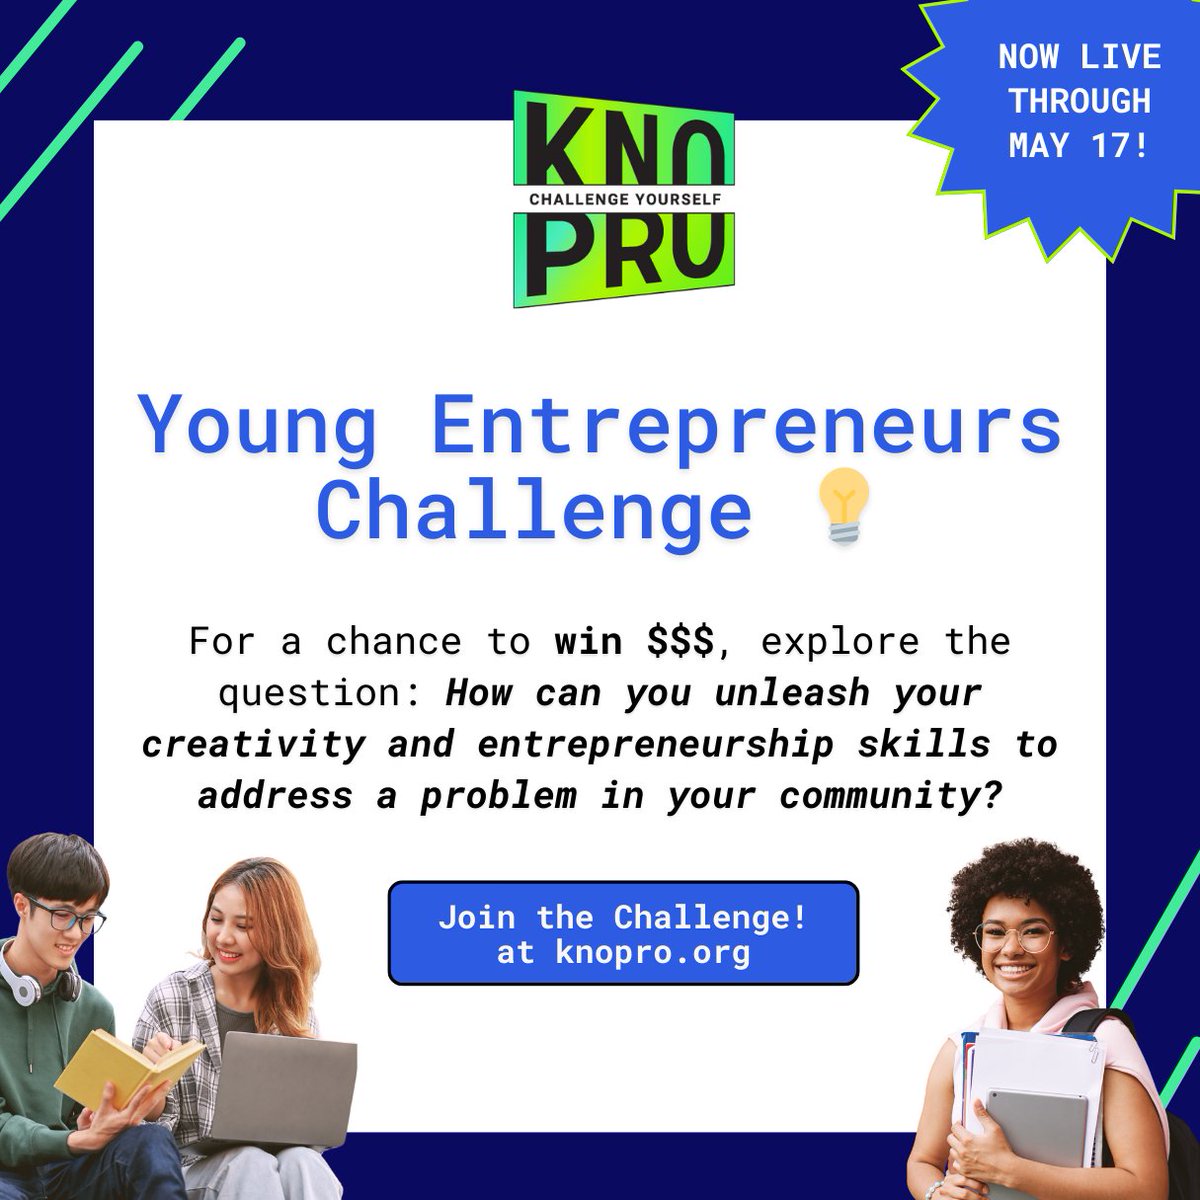 #HighSchool Educators 👉 Share #KnoPro's new Young Entrepreneurs Challenge with your students! They will discover the entrepreneurial secrets needed to transform their innovative ideas into reality. Plus, a chance to earn 💵 for completing the challenge! knopro.org/challenges/you…